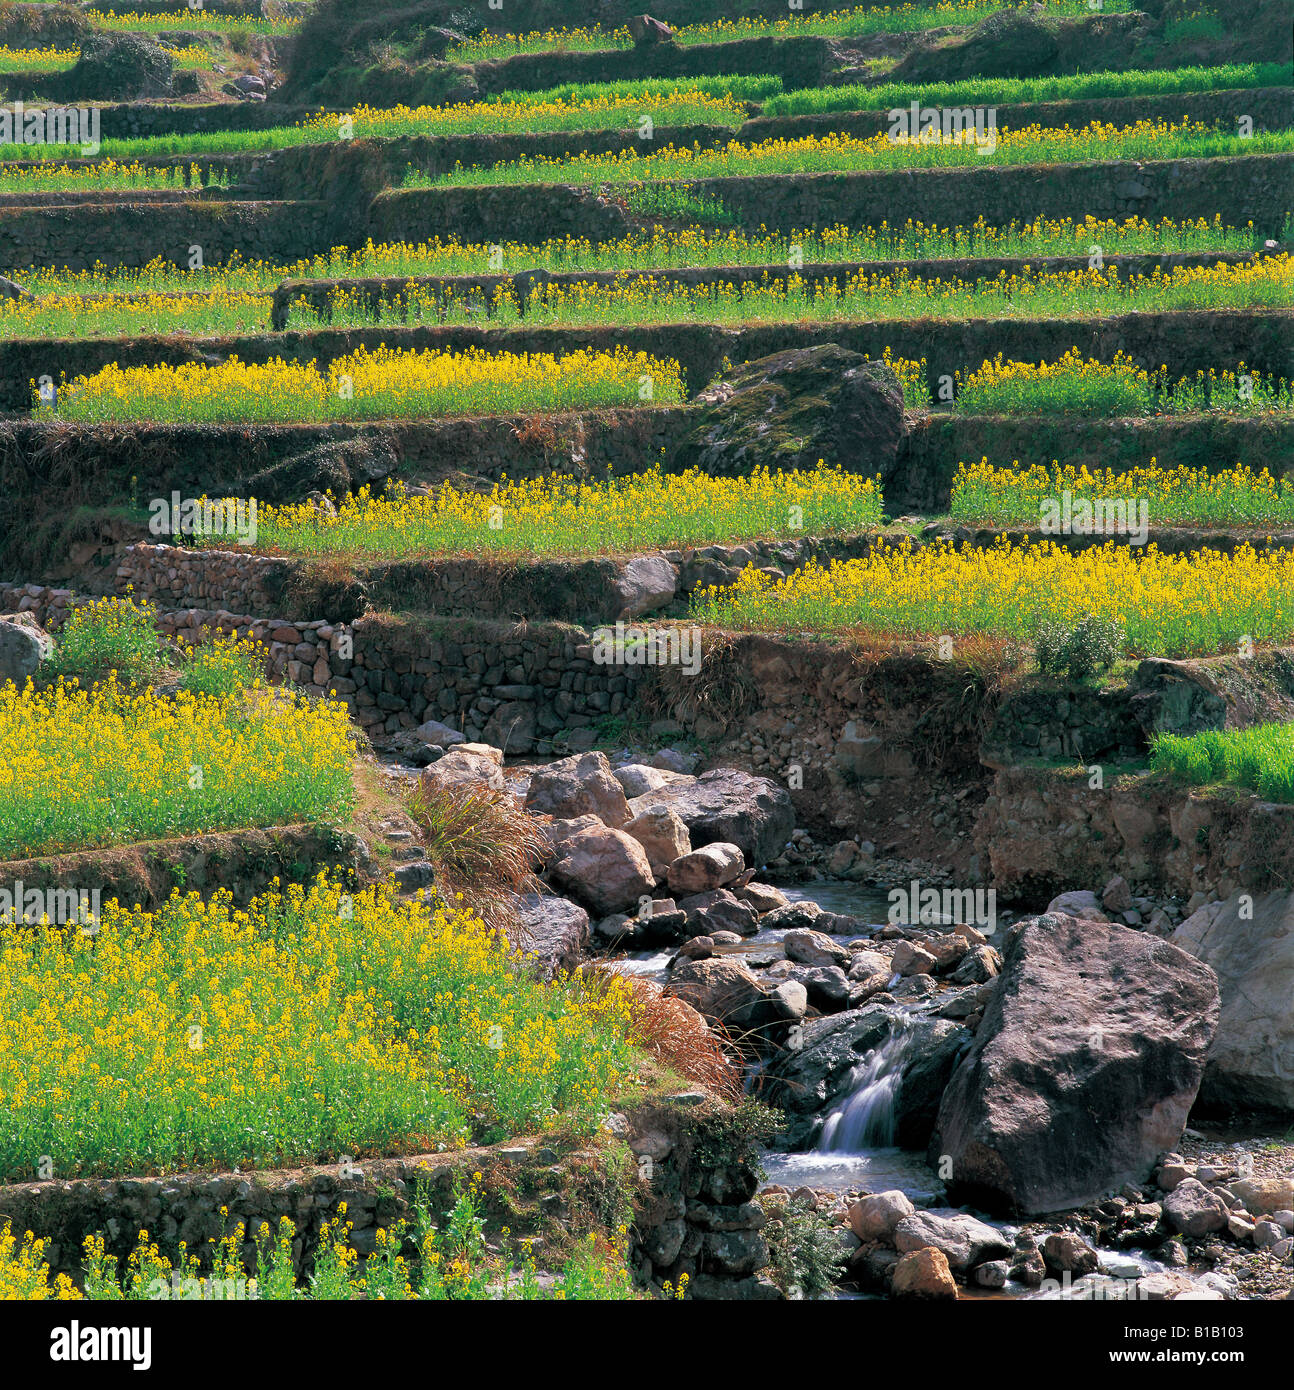 stream through terrace full of yellow flowers in area of ancient Huizhou,Anhui,China Stock Photo